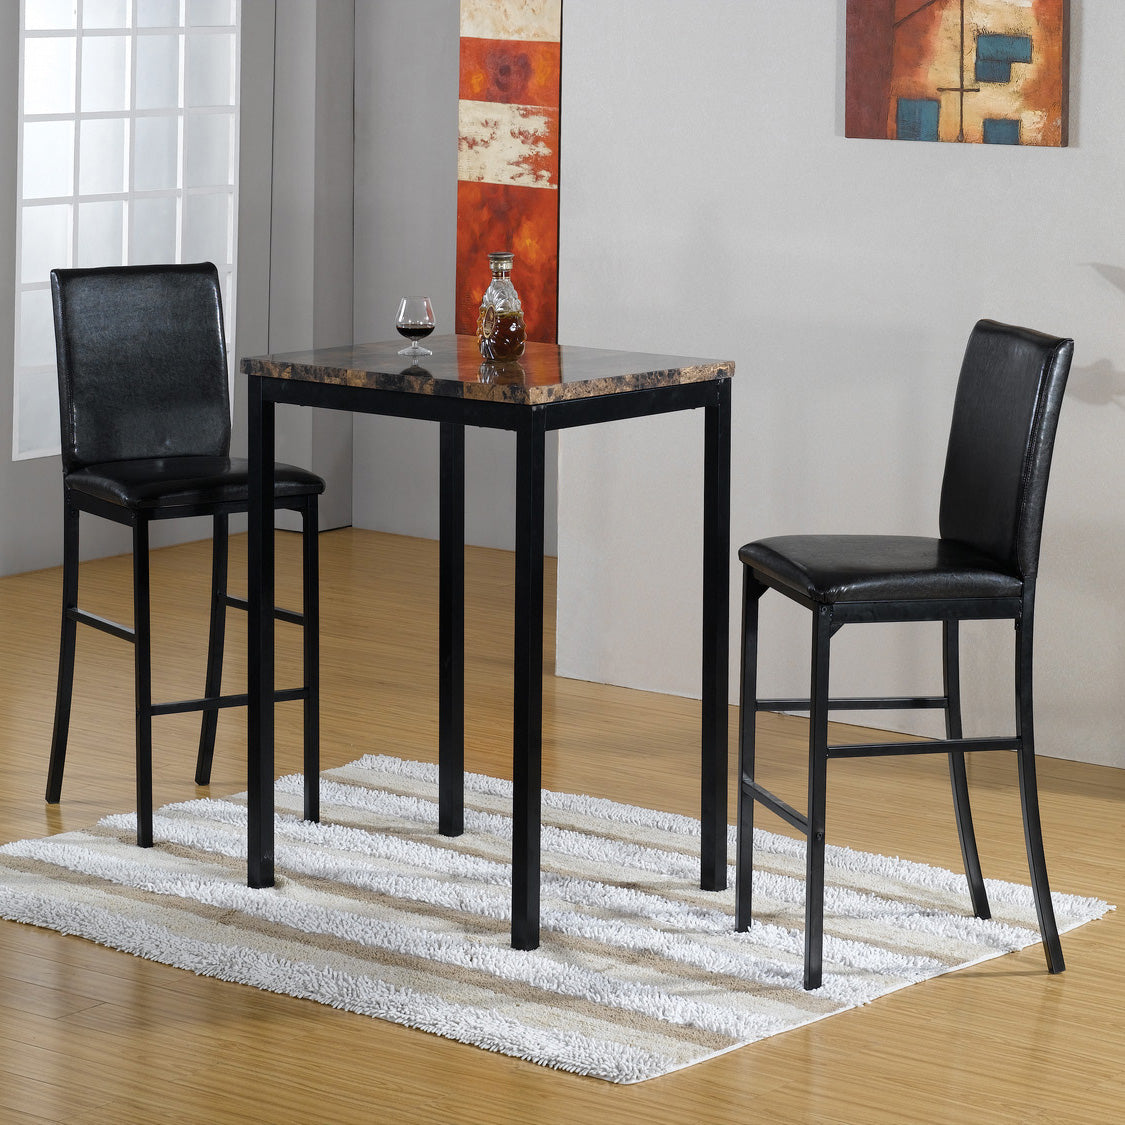 Della Dark Brown 3-piece Counter Height Bistro Set with Faux Marble Table and 2 Faux Leather Side Chairs